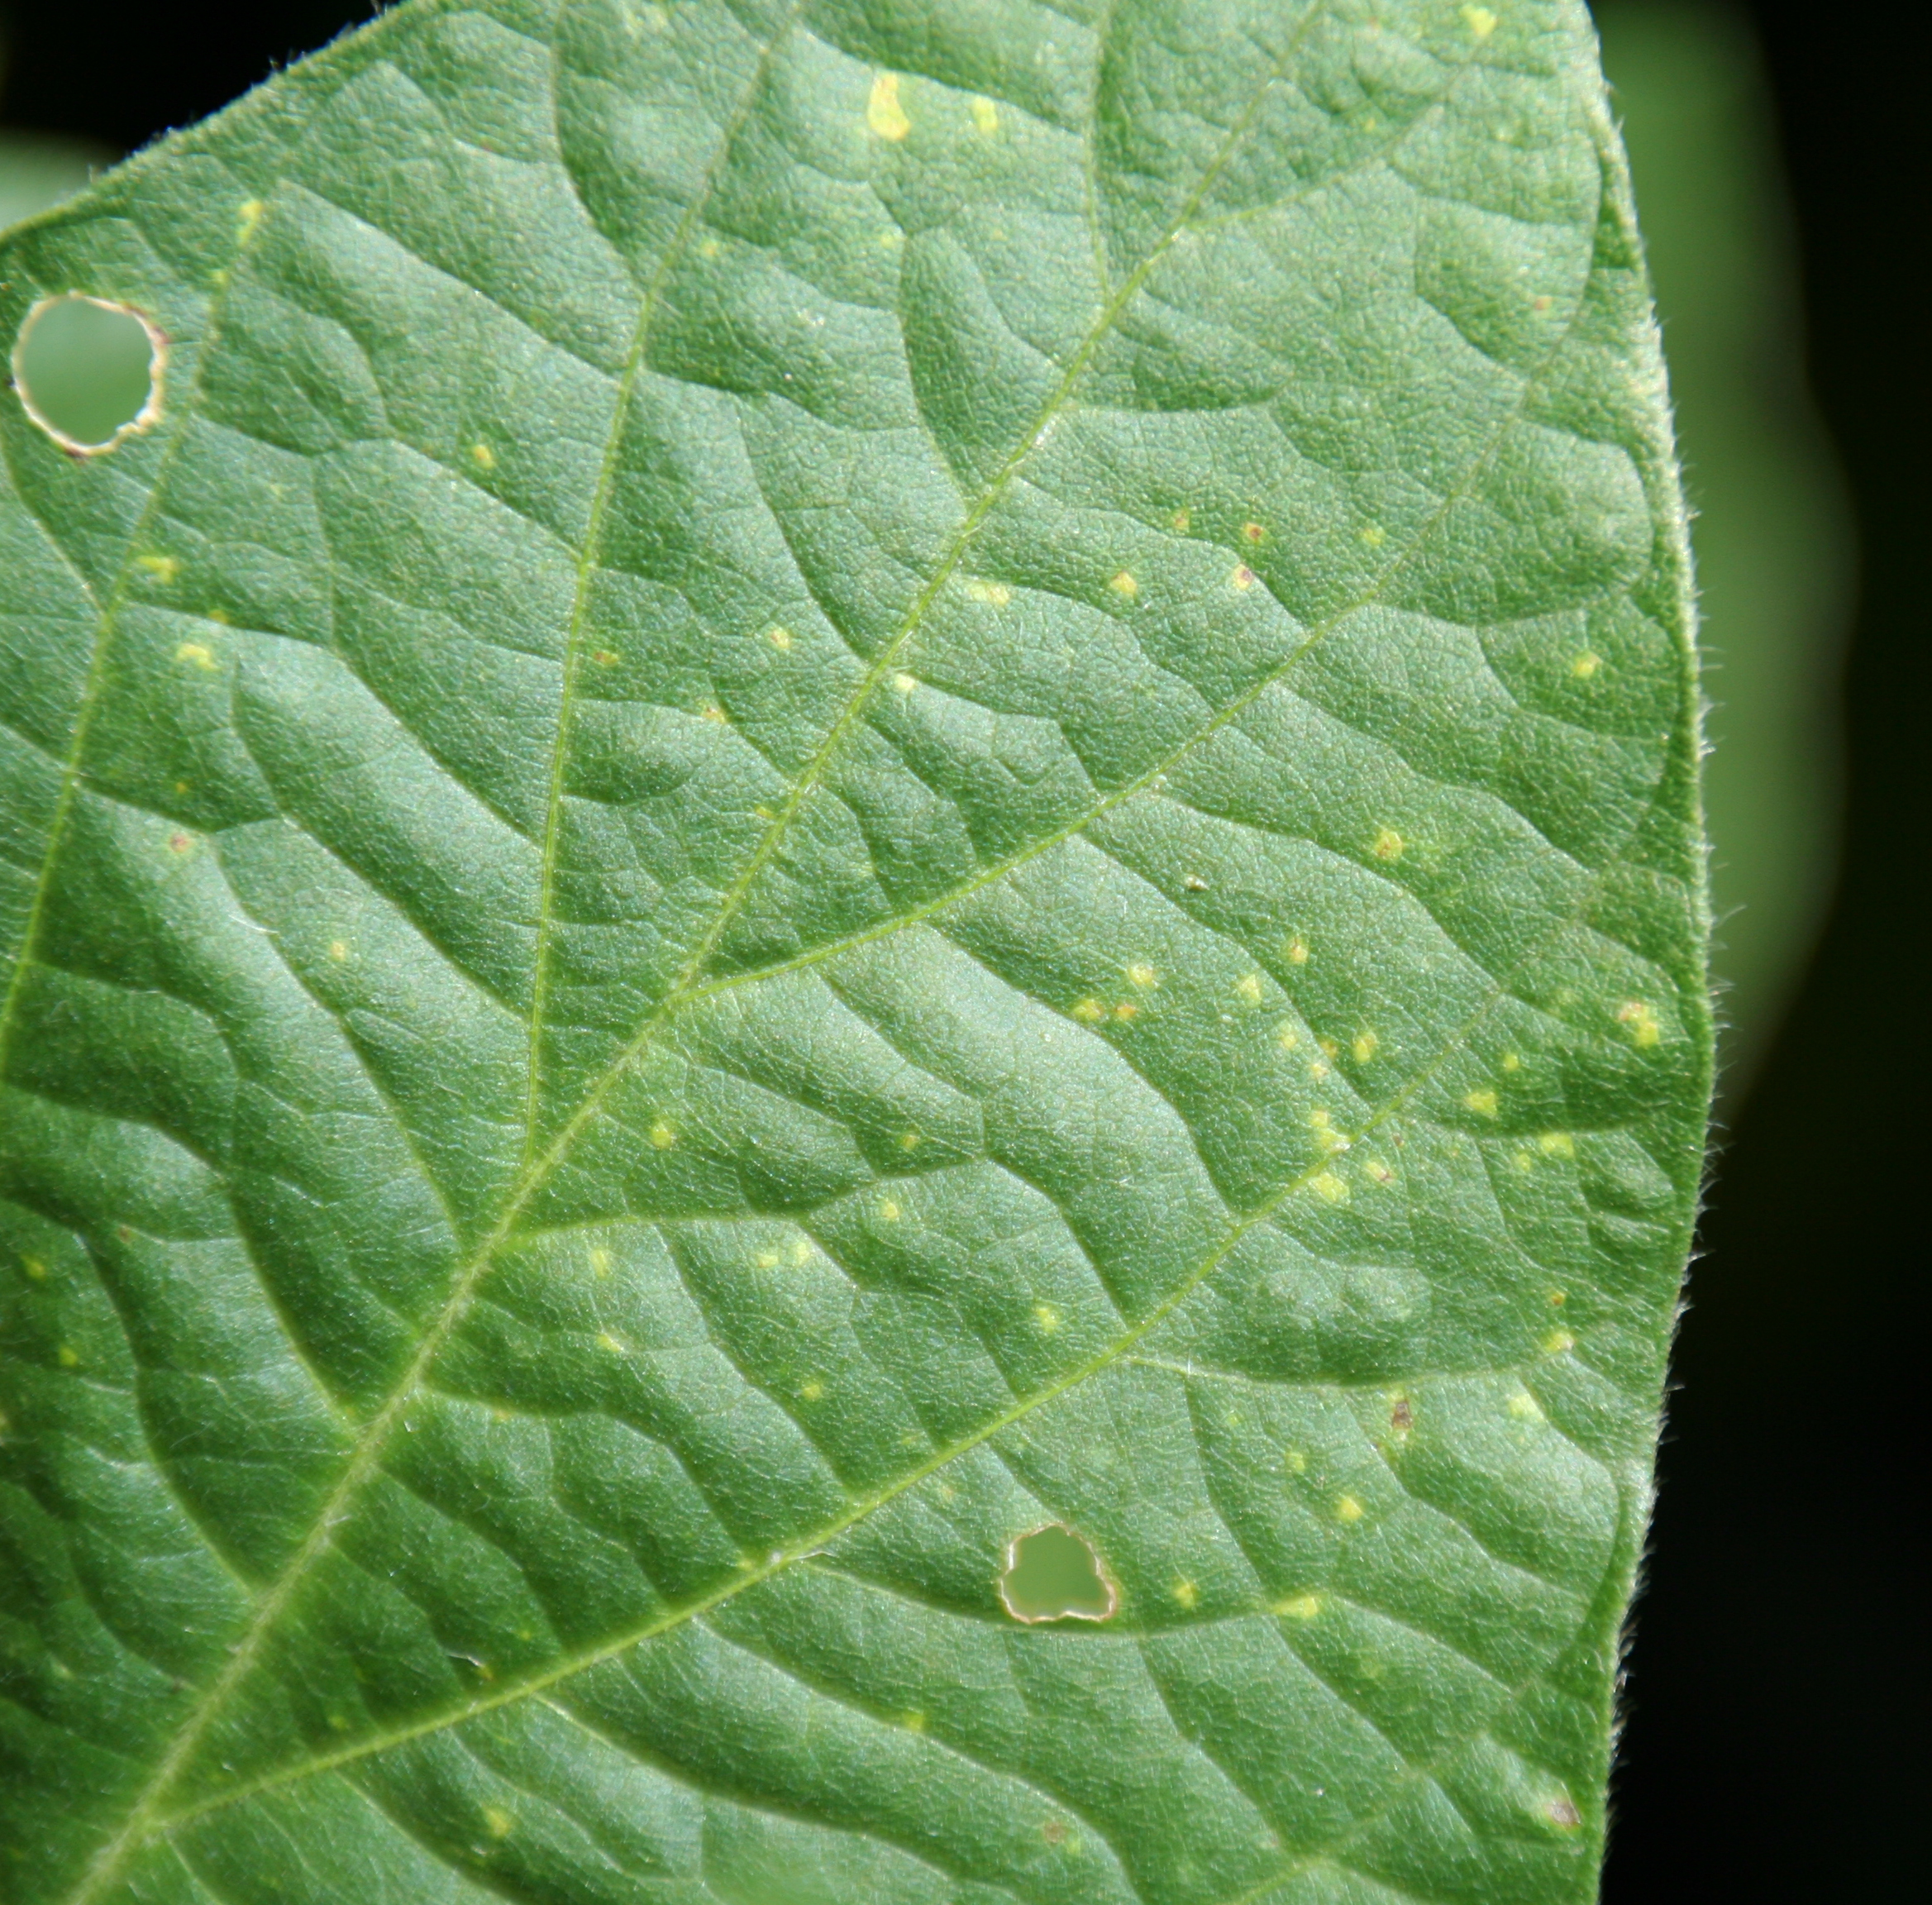 Early downy mildew lesions.